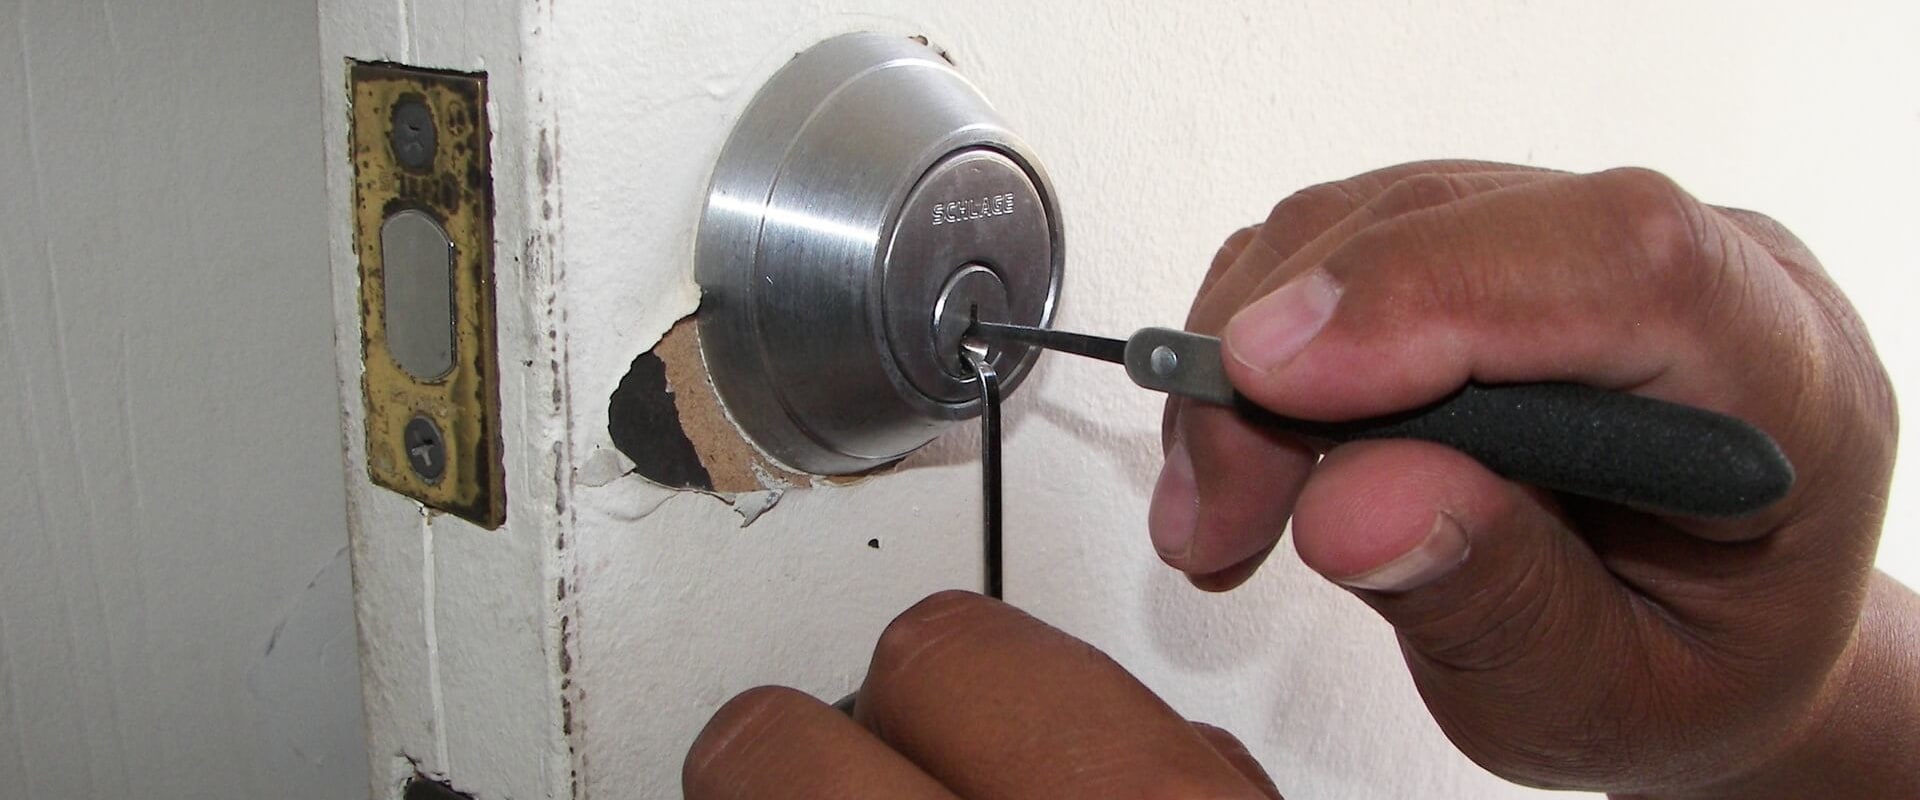 How Locksmiths Verify Ownership: A Professional's Perspective